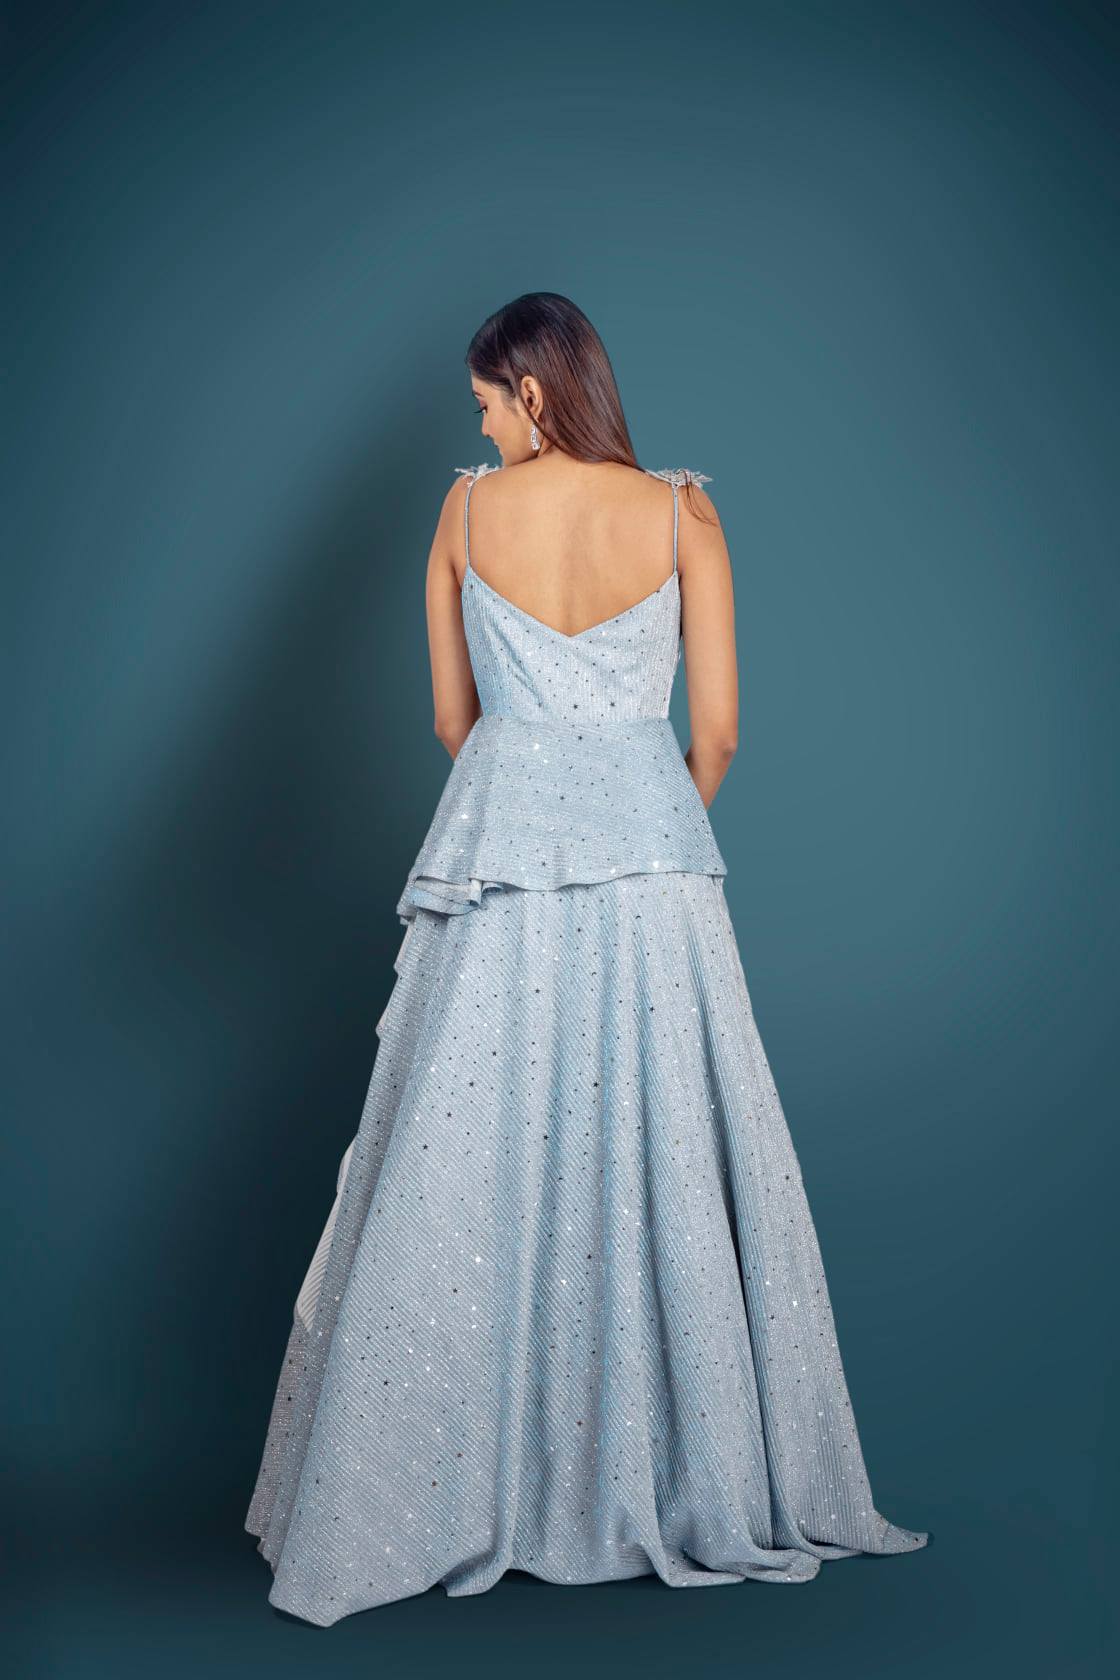 This baby blue gown from Digio Bridal featuring an airy skirt is enchanting  us with sweet romance! | Beautiful prom dresses, Blue wedding gowns, Prom  dresses blue